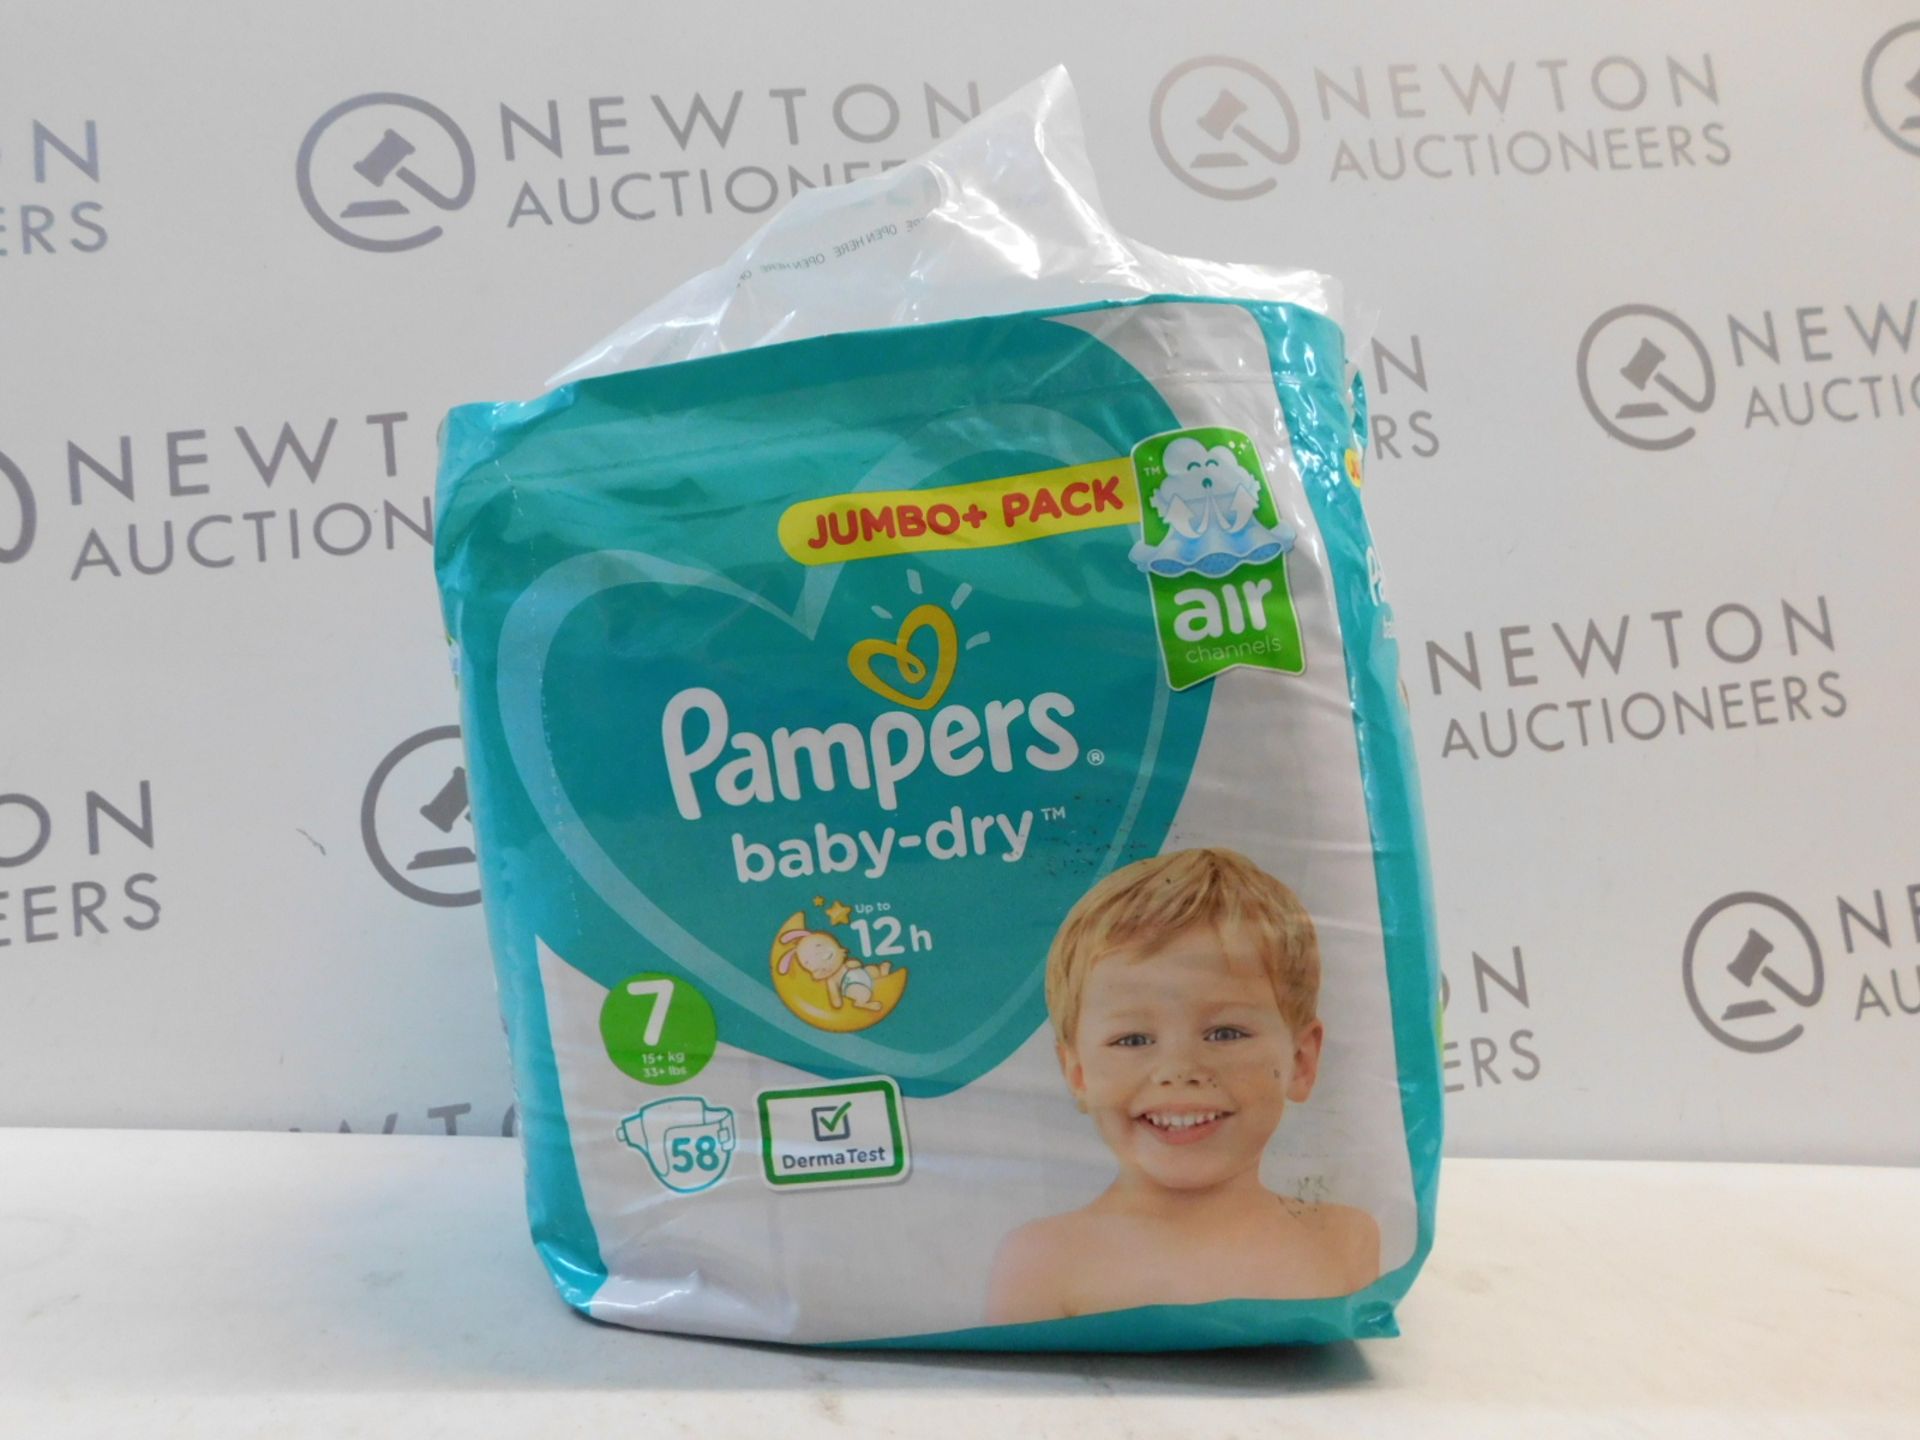 1 PACK OF PAMPERS SIZE 7 58 PREMIUM NAPPIES RRP Â£12.99